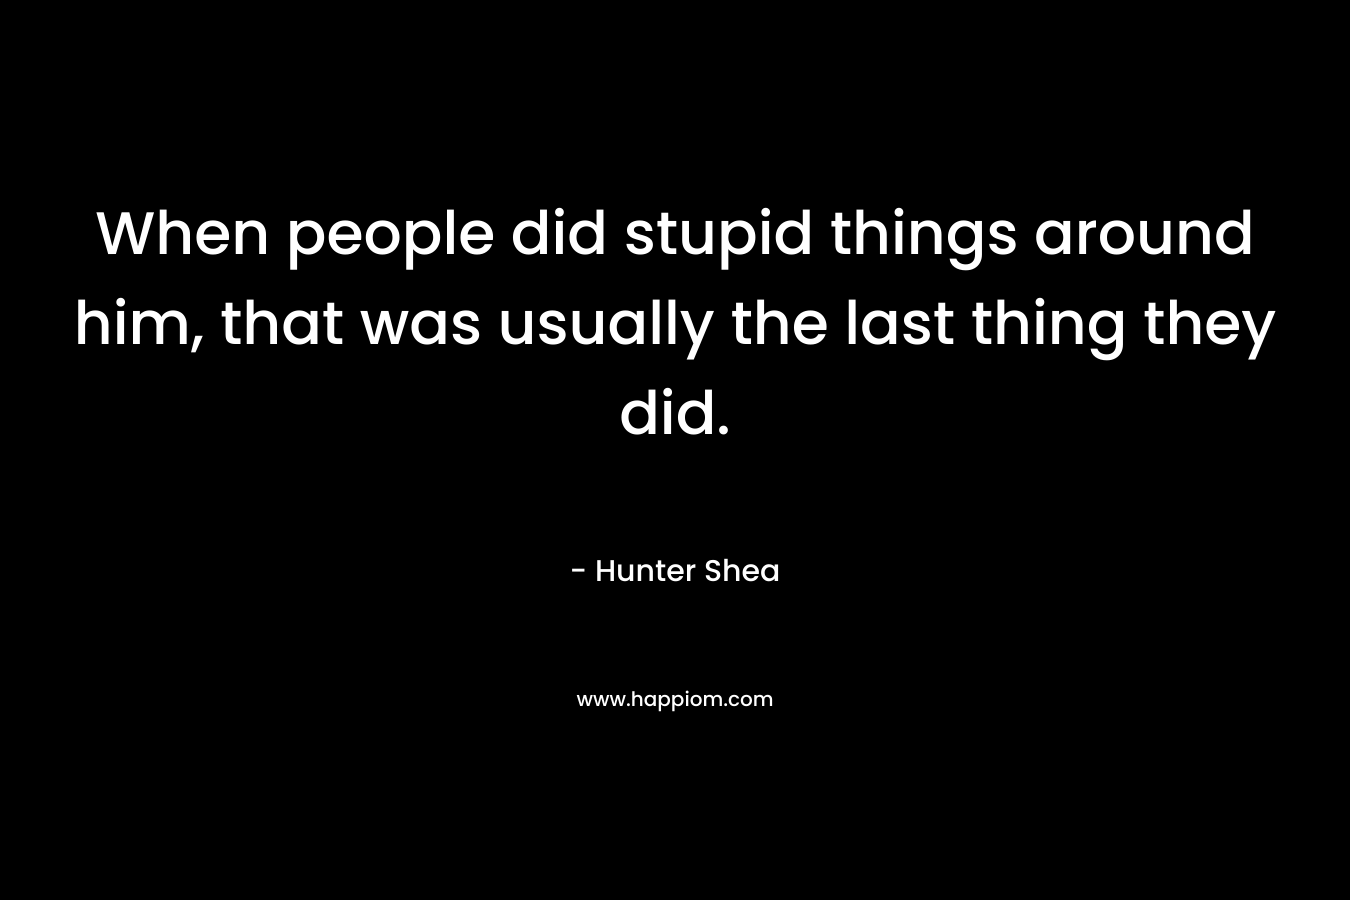 When people did stupid things around him, that was usually the last thing they did.